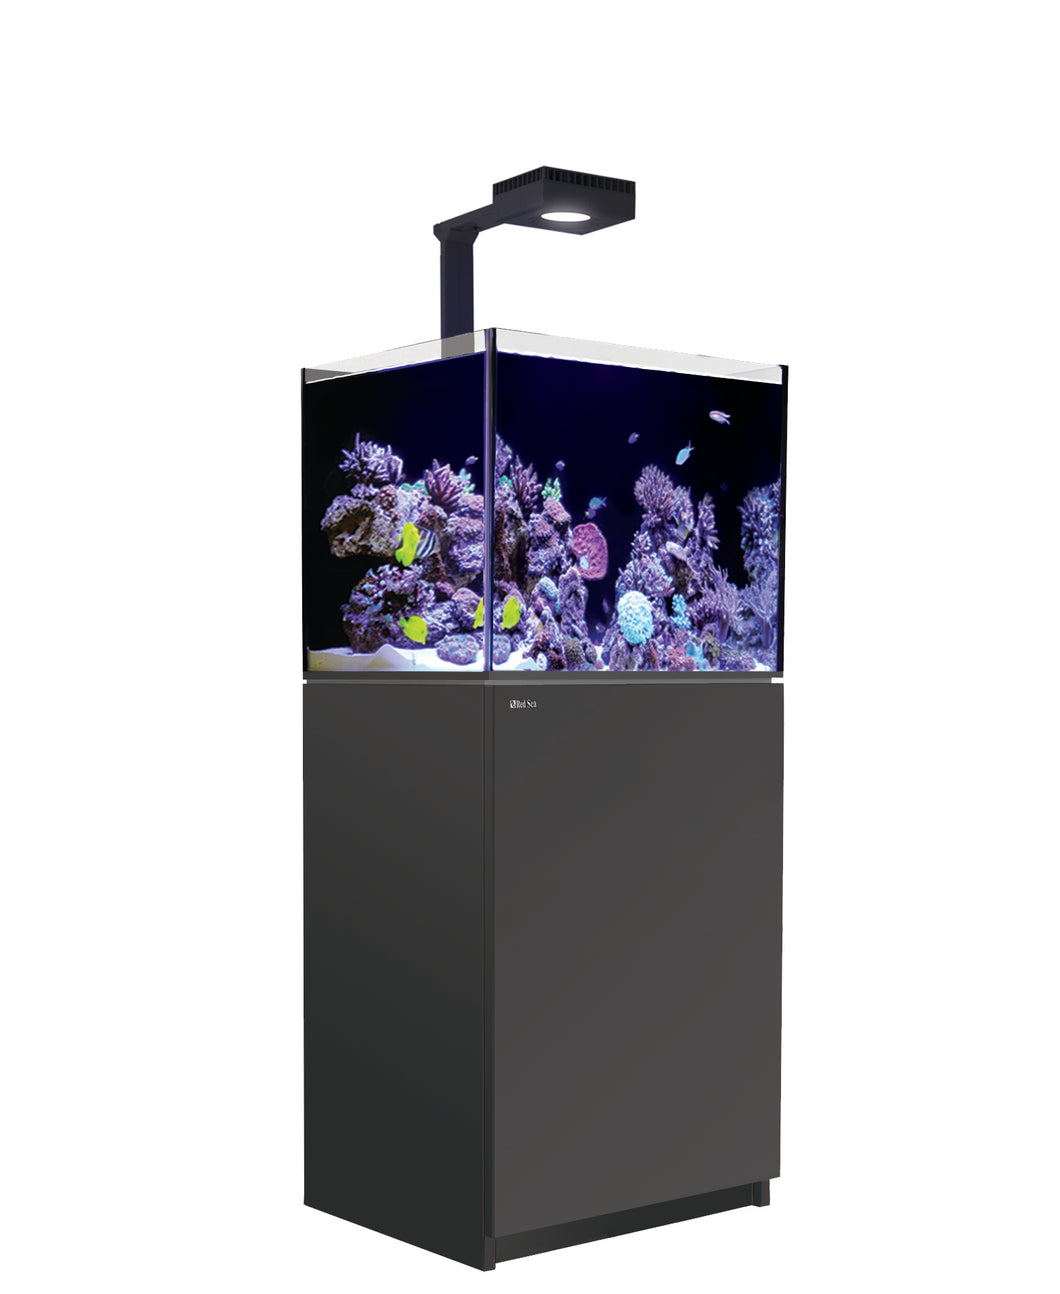 Red Sea REEFER-170 G2 Deluxe Premium Reef Aquarium 44 Gallons Reef-Ready LED Systems